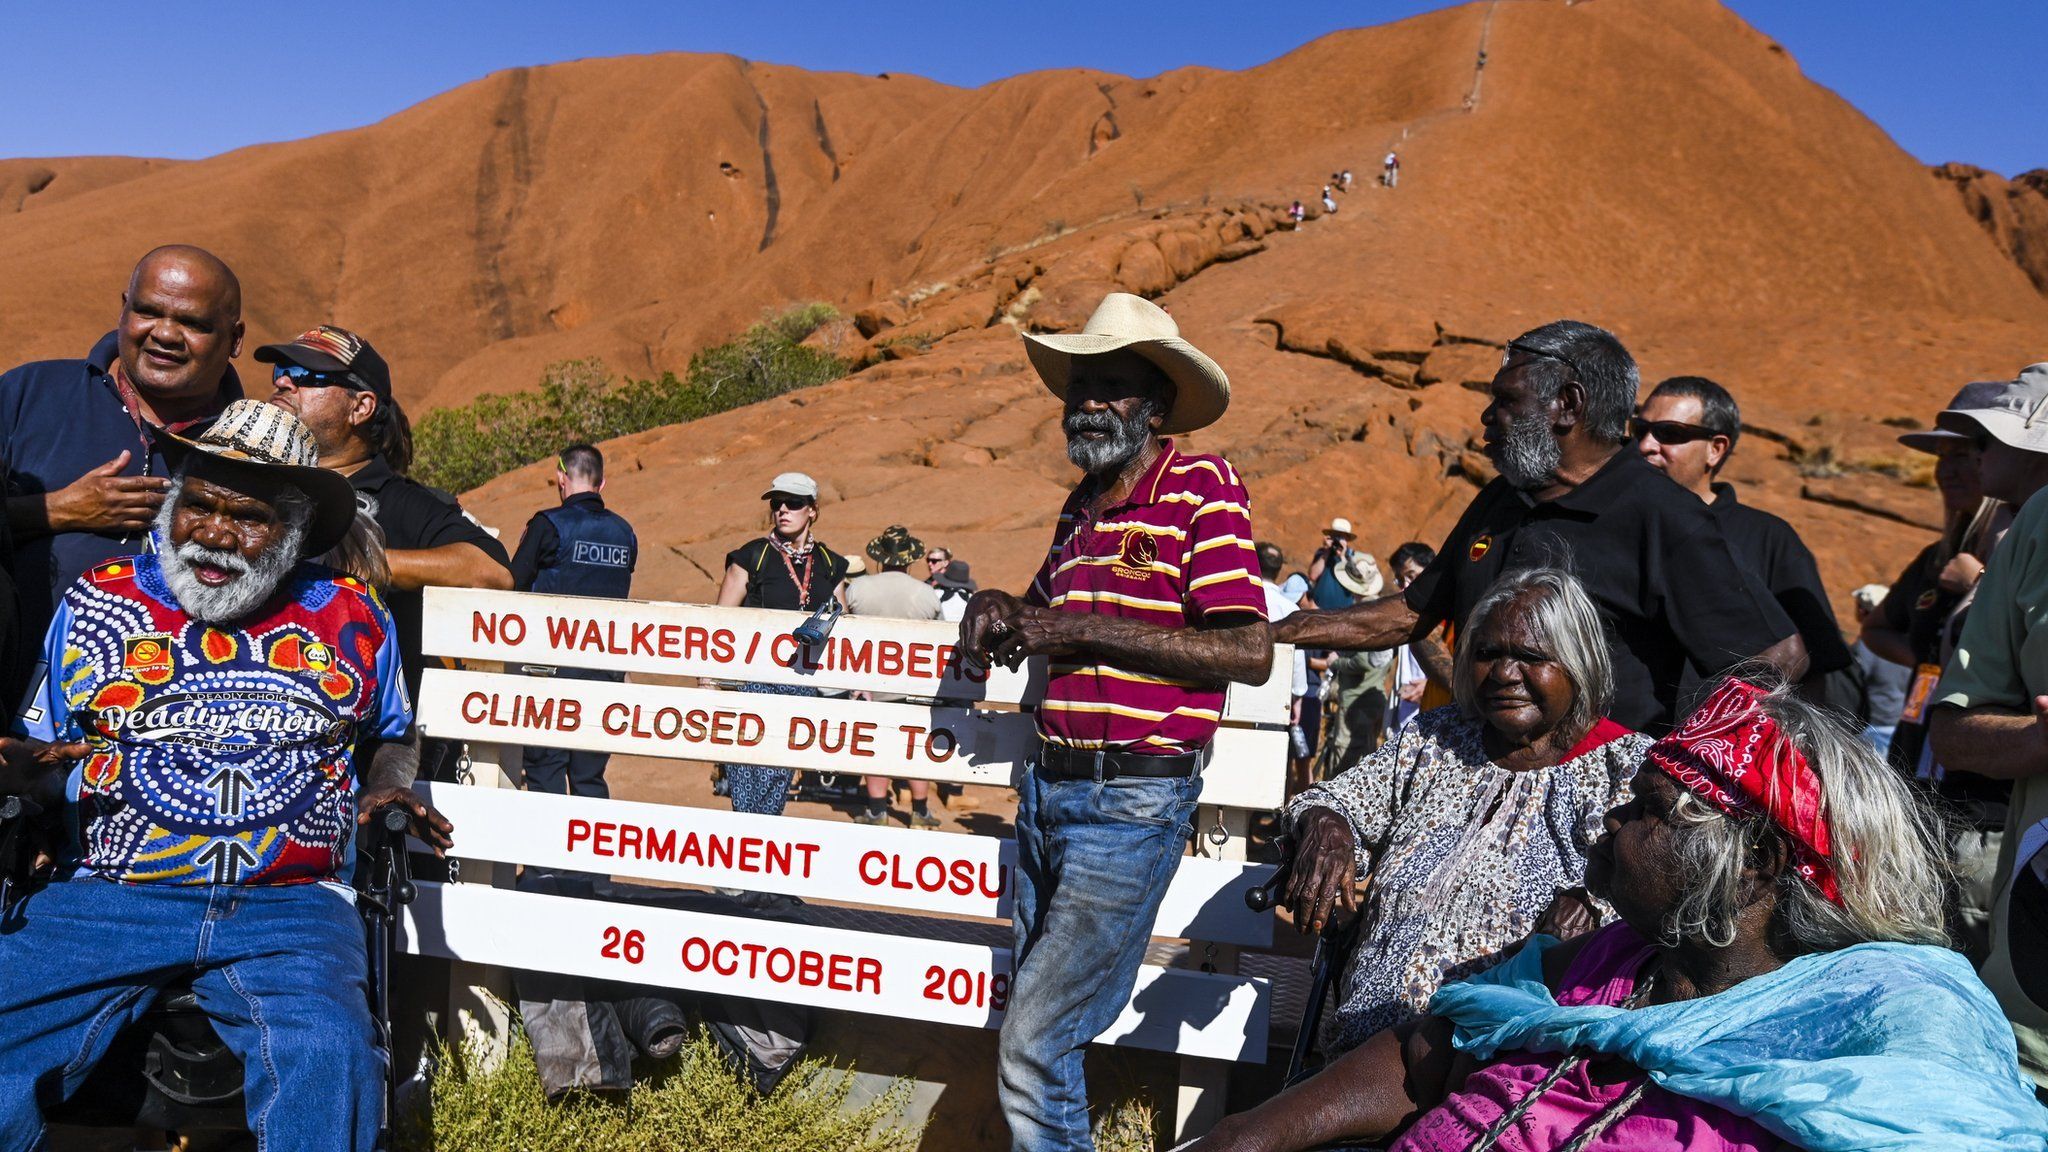 Traditional owners pose for photographs next to the newly installed sign after the permanent closure of the climb at Uluru